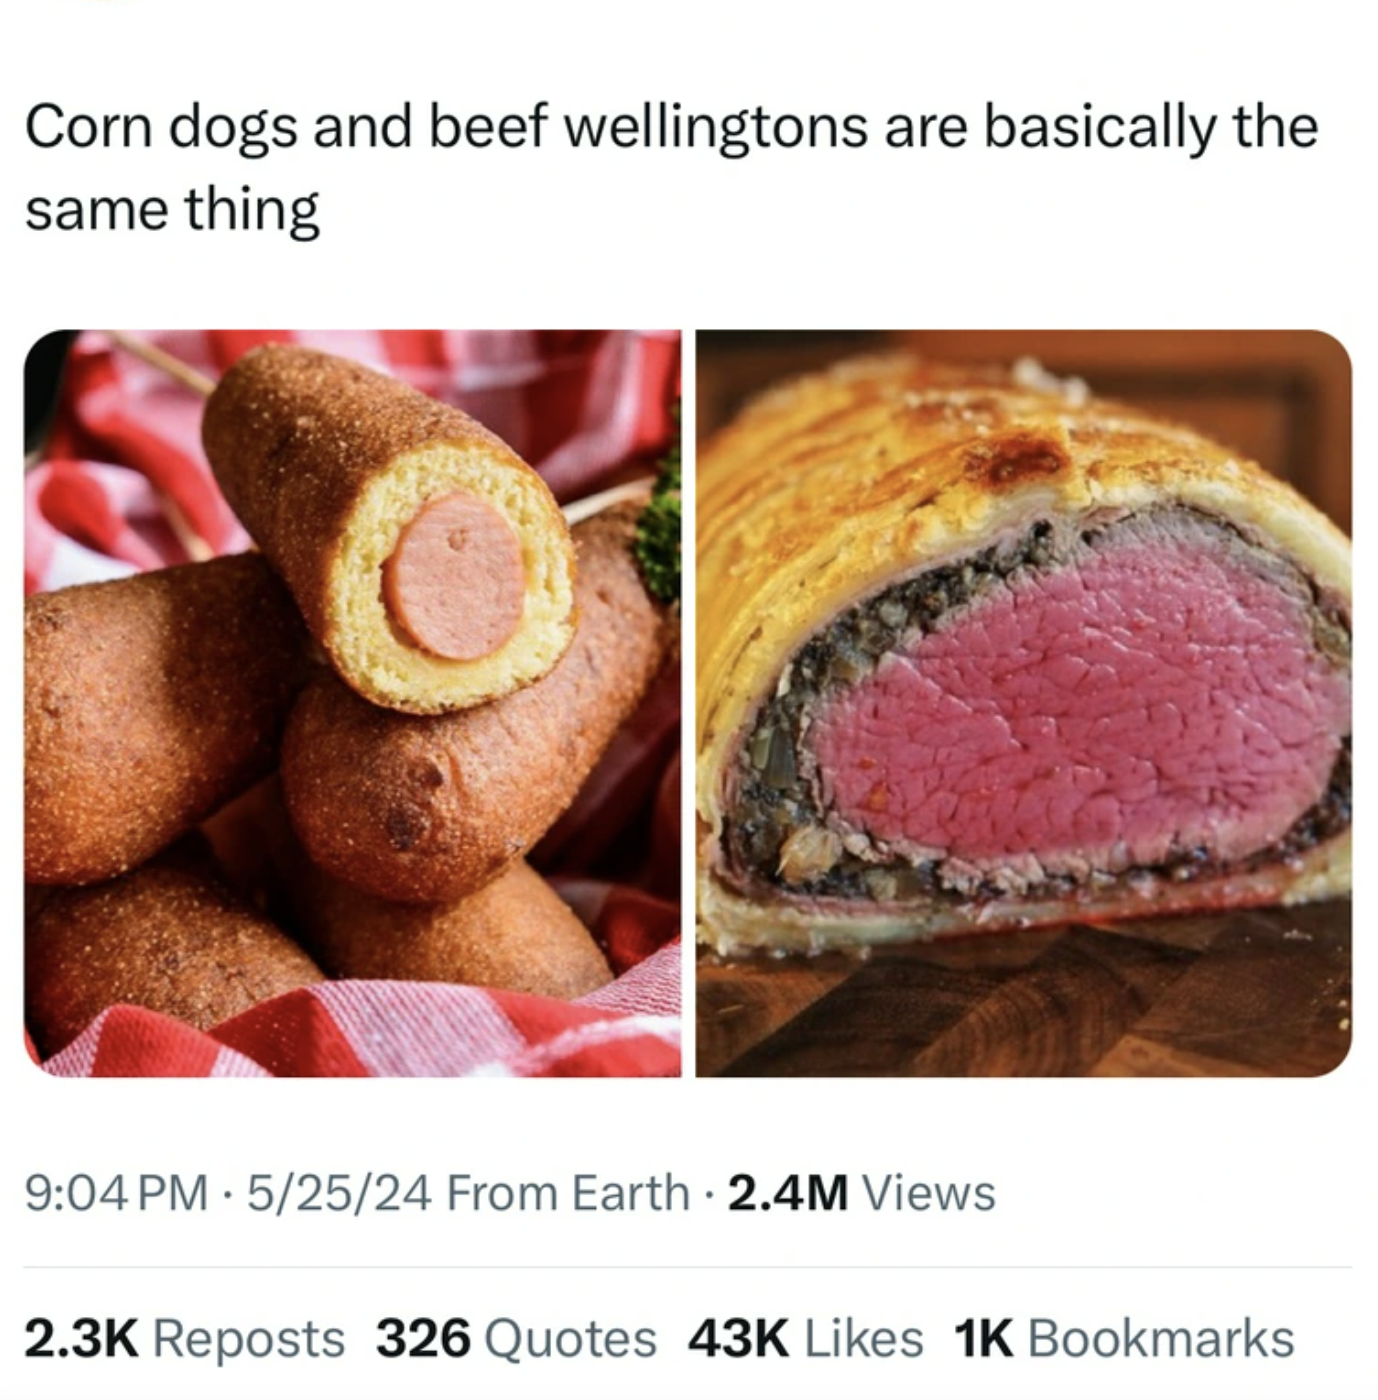 Corn dogs and beef wellingtons are basically the same thing 52524 From Earth 2.4M Views Reposts 326 Quotes 43K 1K Bookmarks